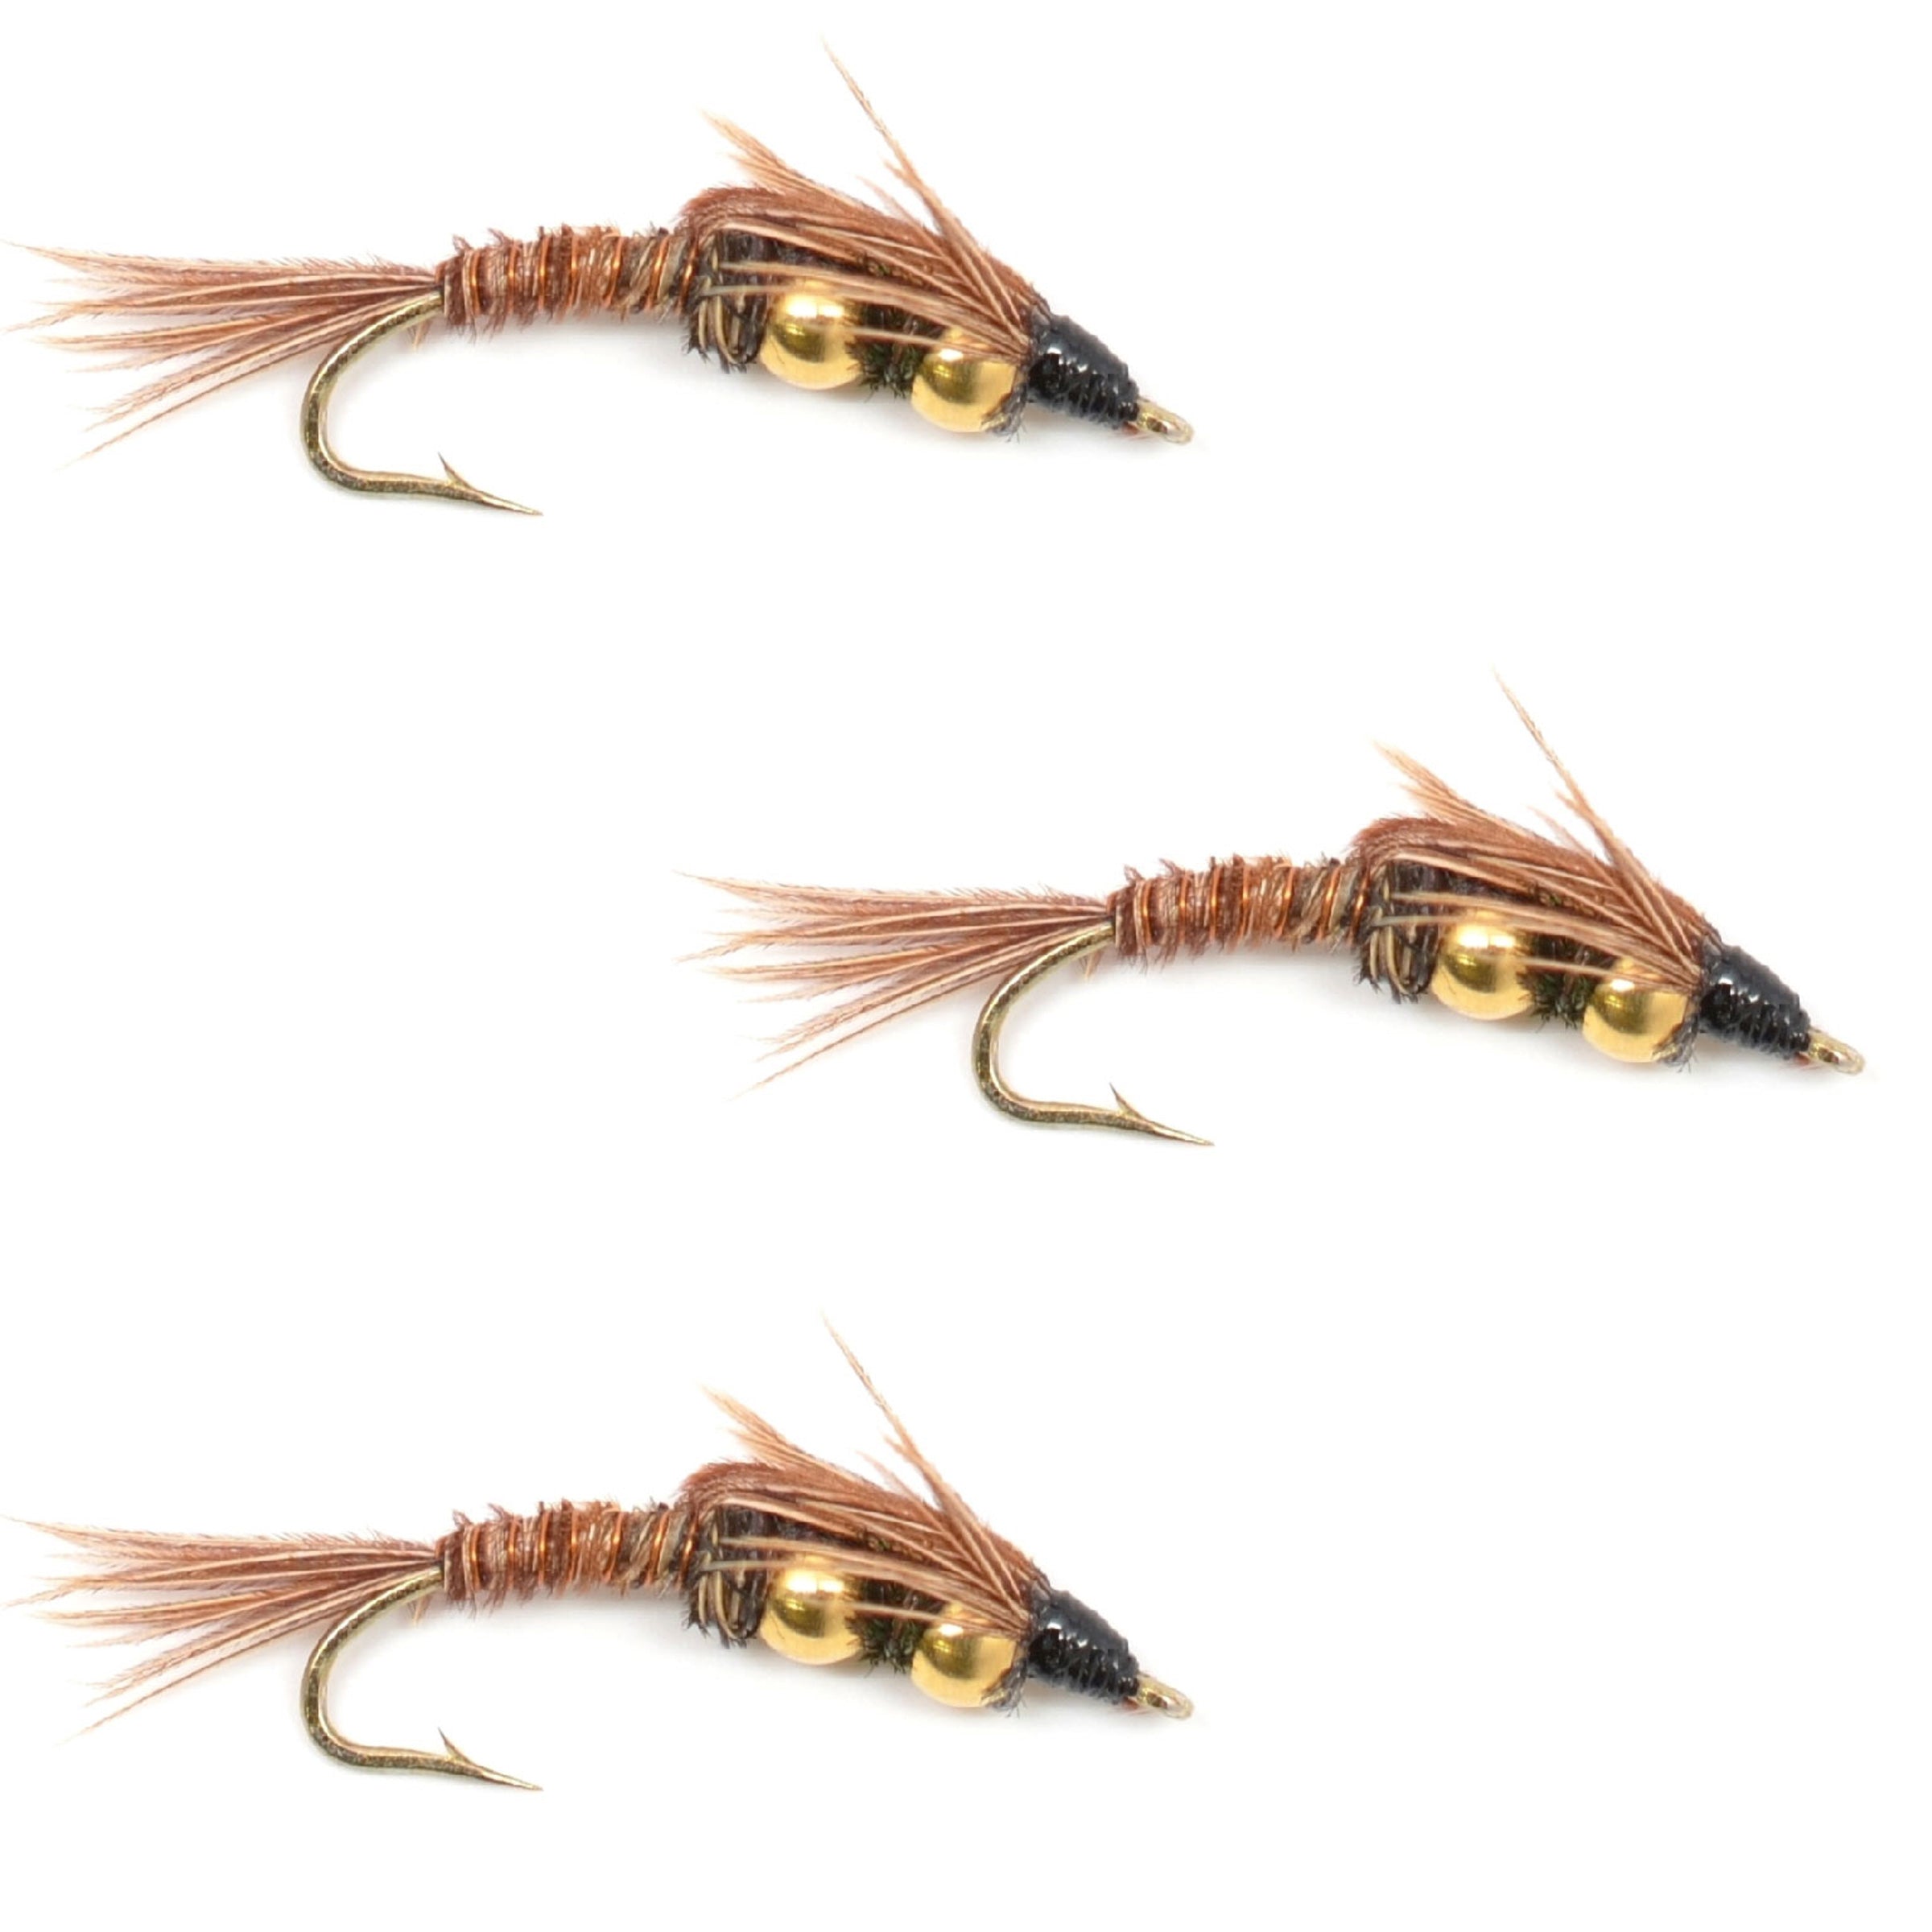 3 Pack Double Bead Pheasant Tail Nymph Fly Fishing Flies Hook Size 10